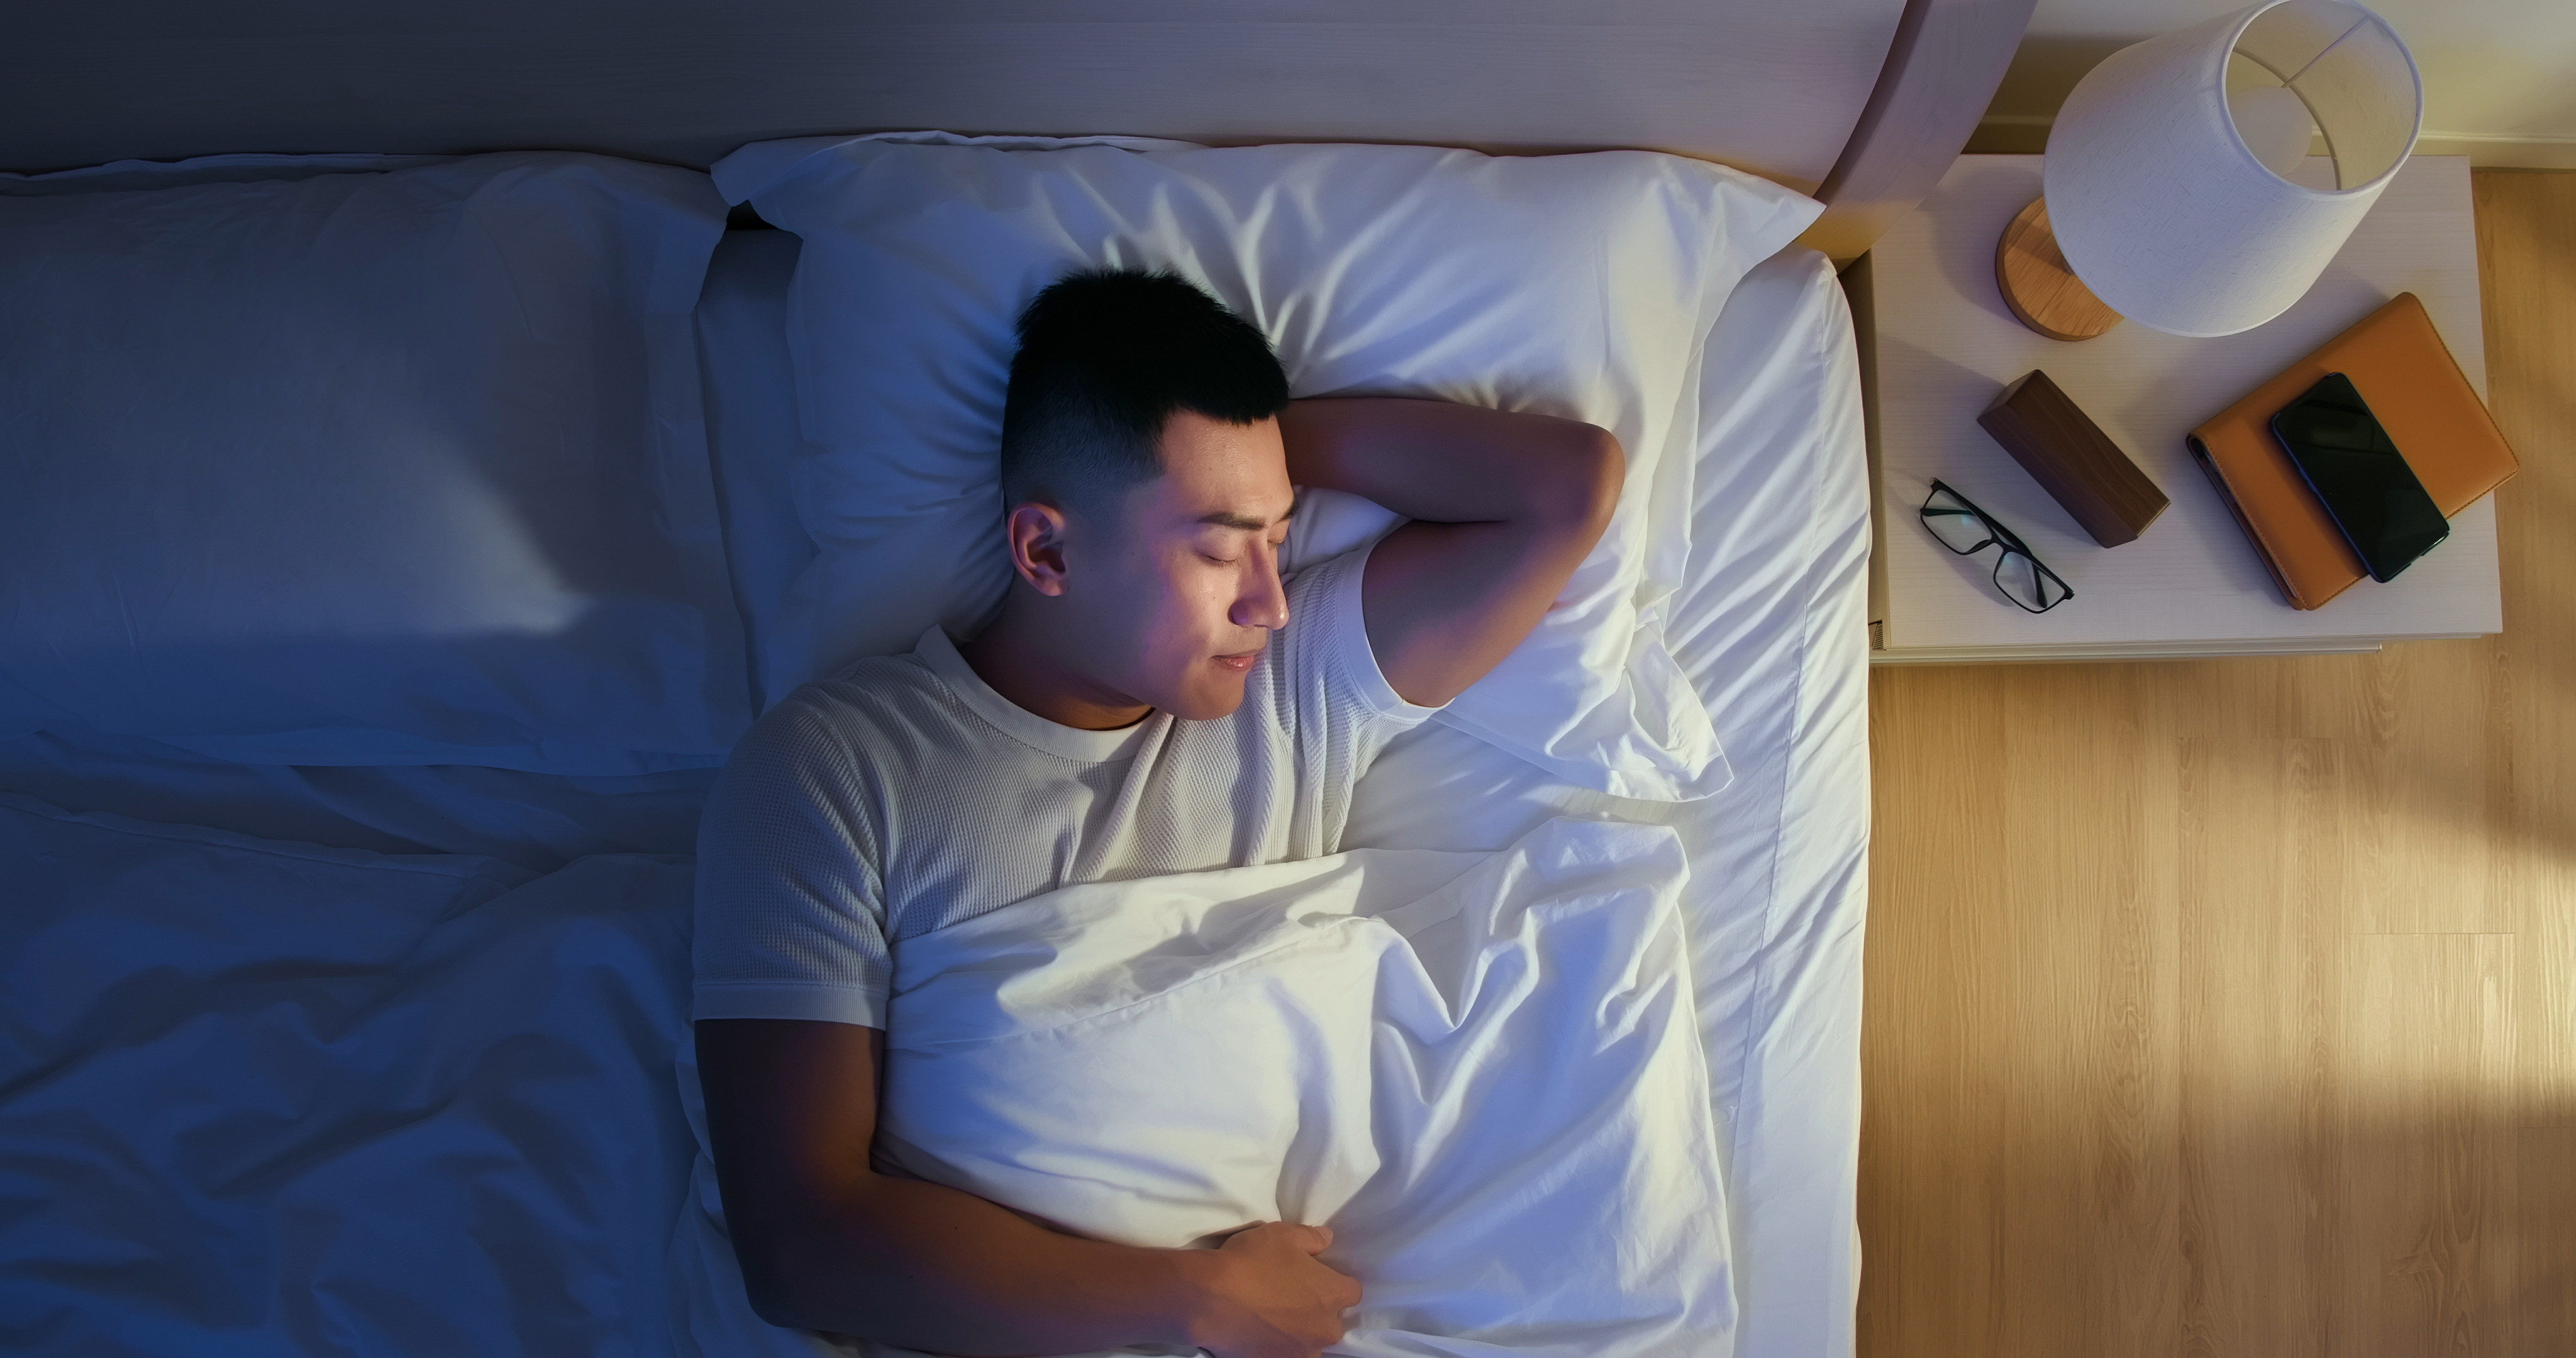 Getting a good night’s sleep can help counteract the effects of stress. Photo: Shutterstock